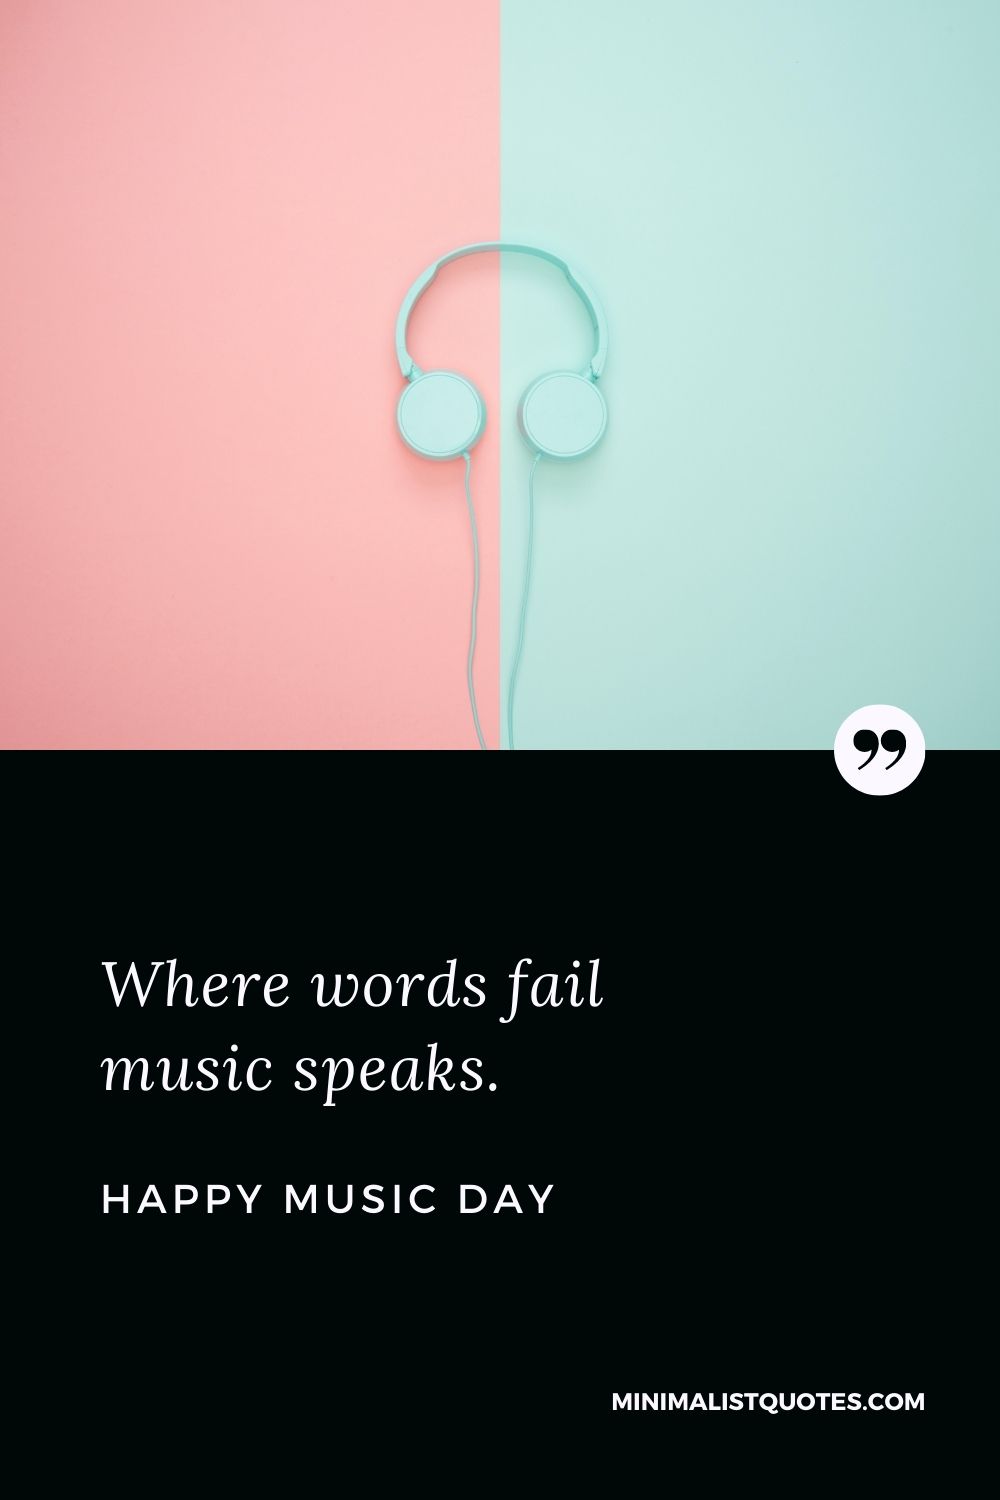 World music day wishes with HD image: Where words fail music speaks. Happy Music Day!